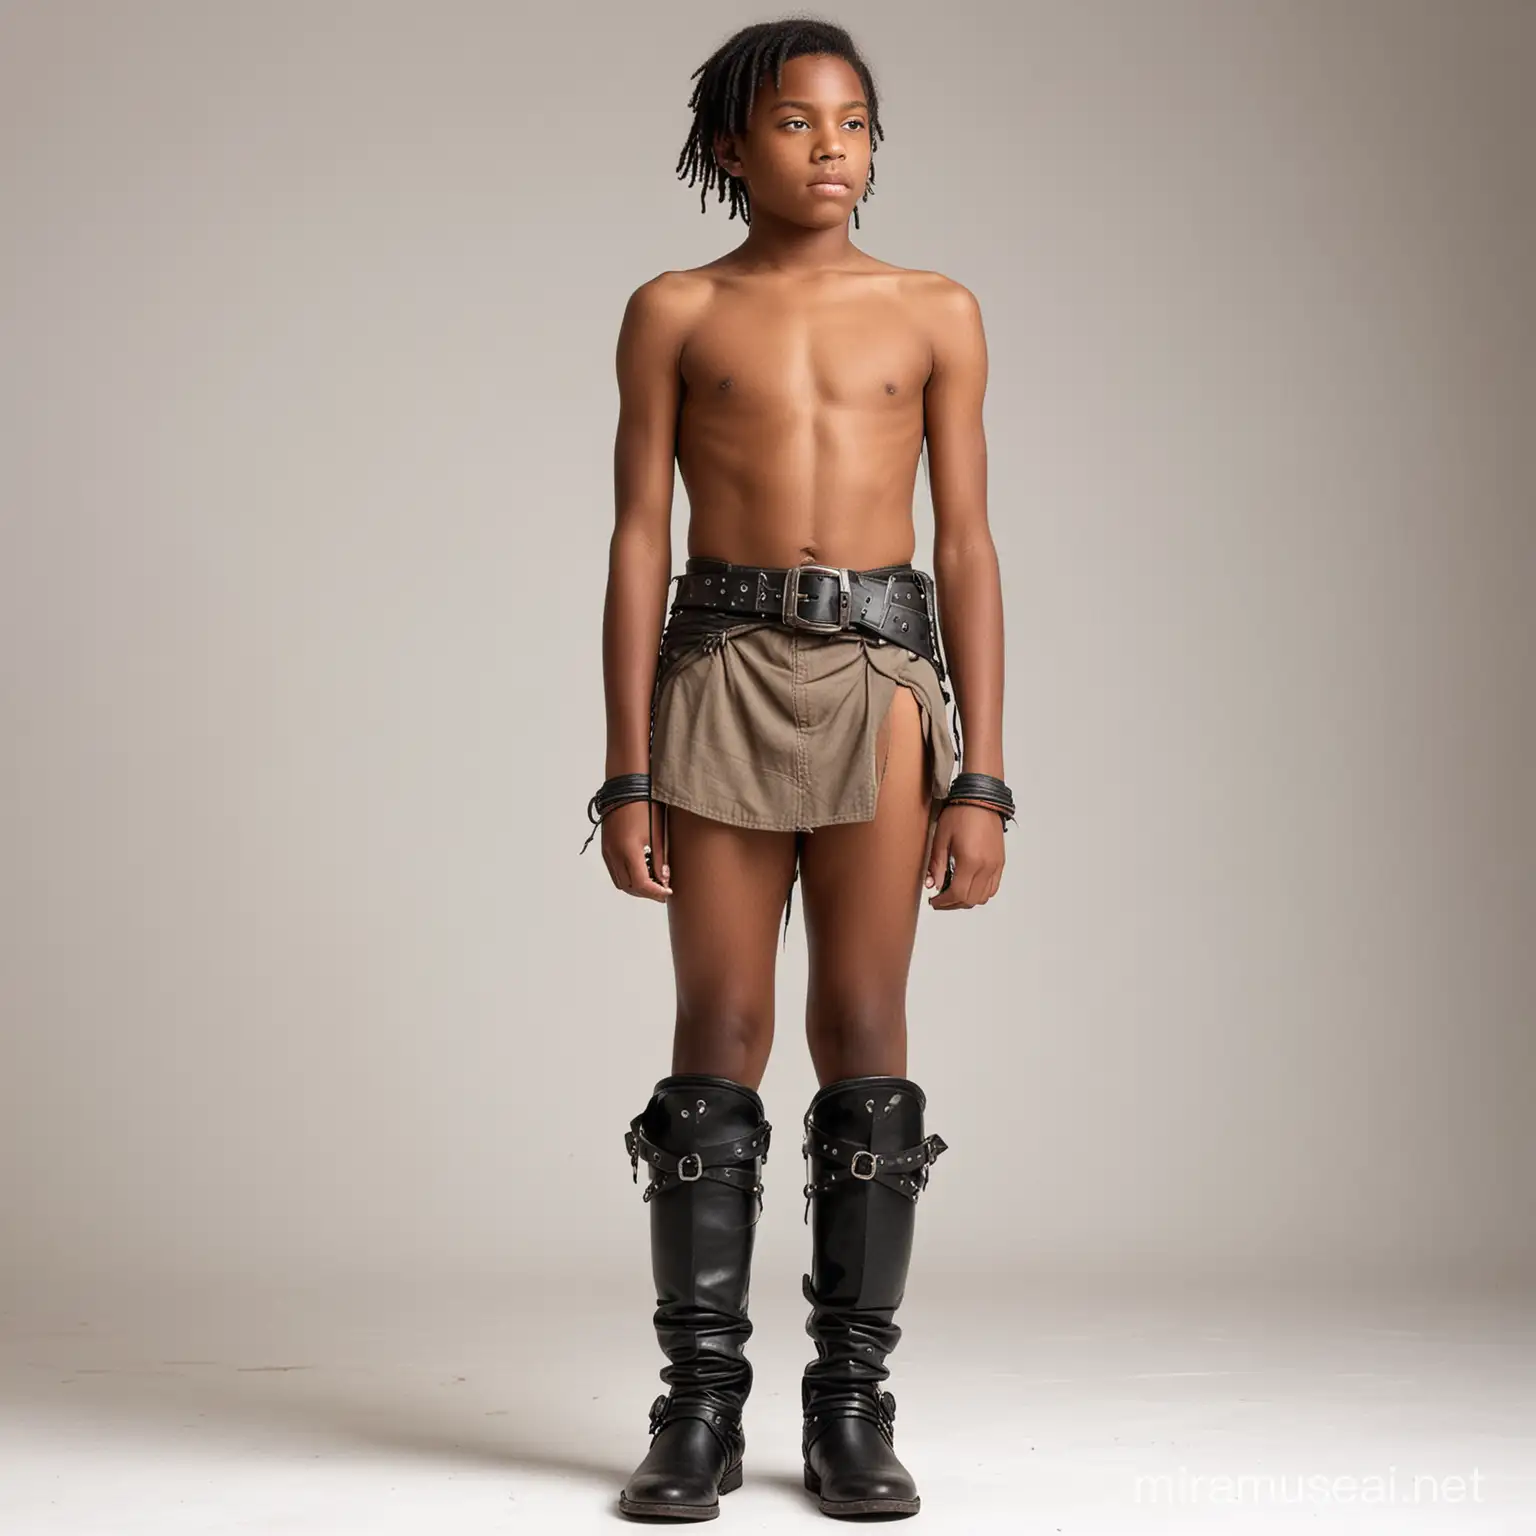 A very young black shirtless teenage boy warrior, wearing a very short loincloth with a big leather belt and boots, seen from behind, white background.